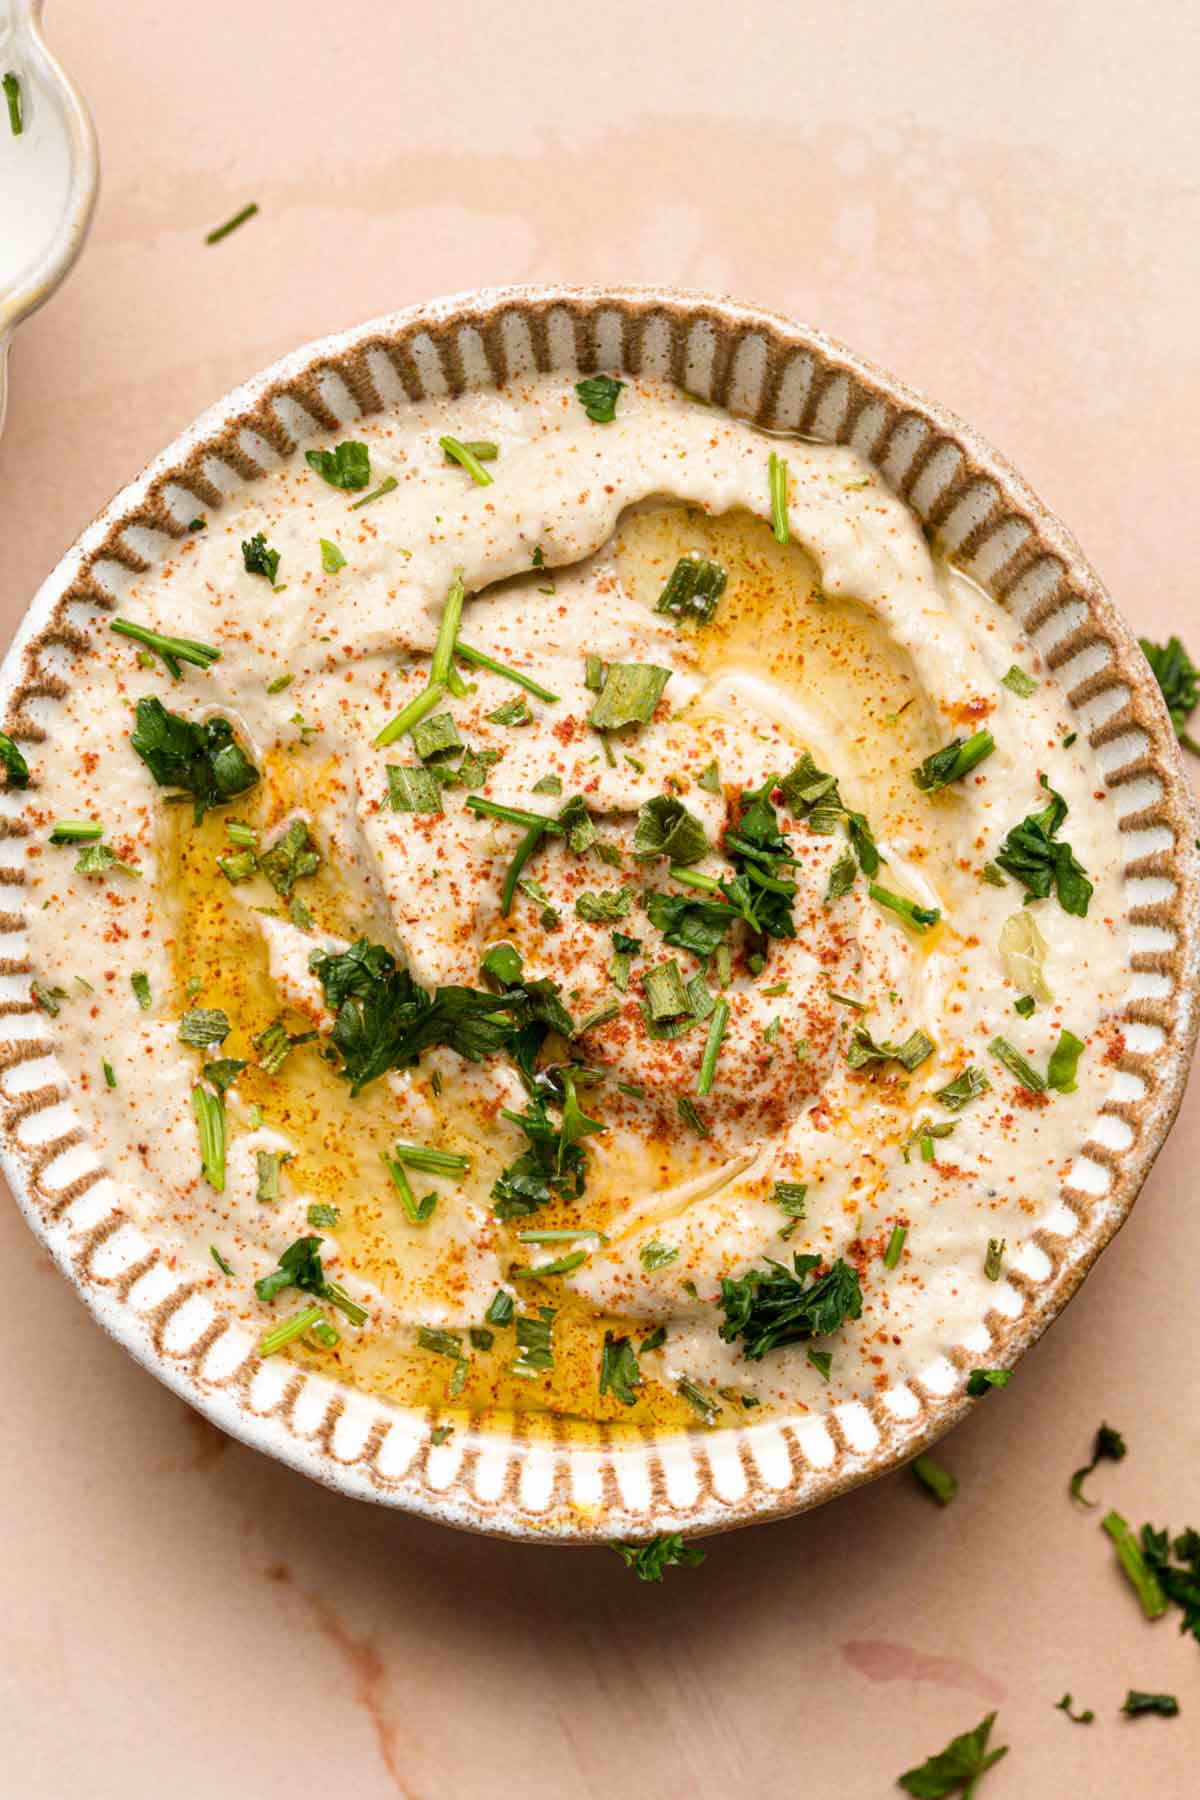 Baba ganoush topped off with parsley, olive oil and paprika.